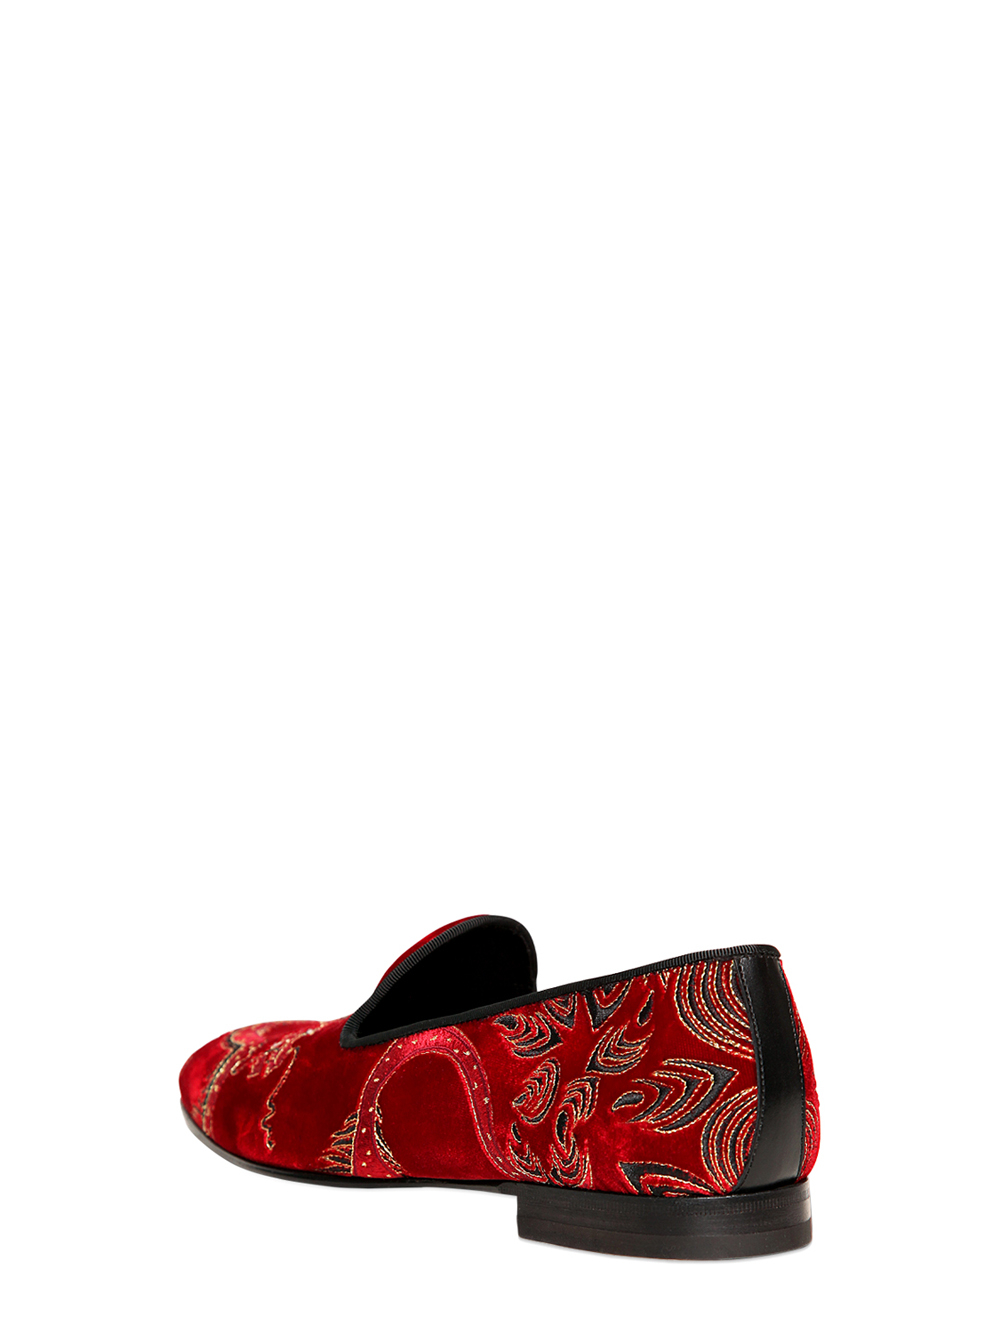 Max verre Dragon Embroidered Velvet Loafers in Red for Men | Lyst